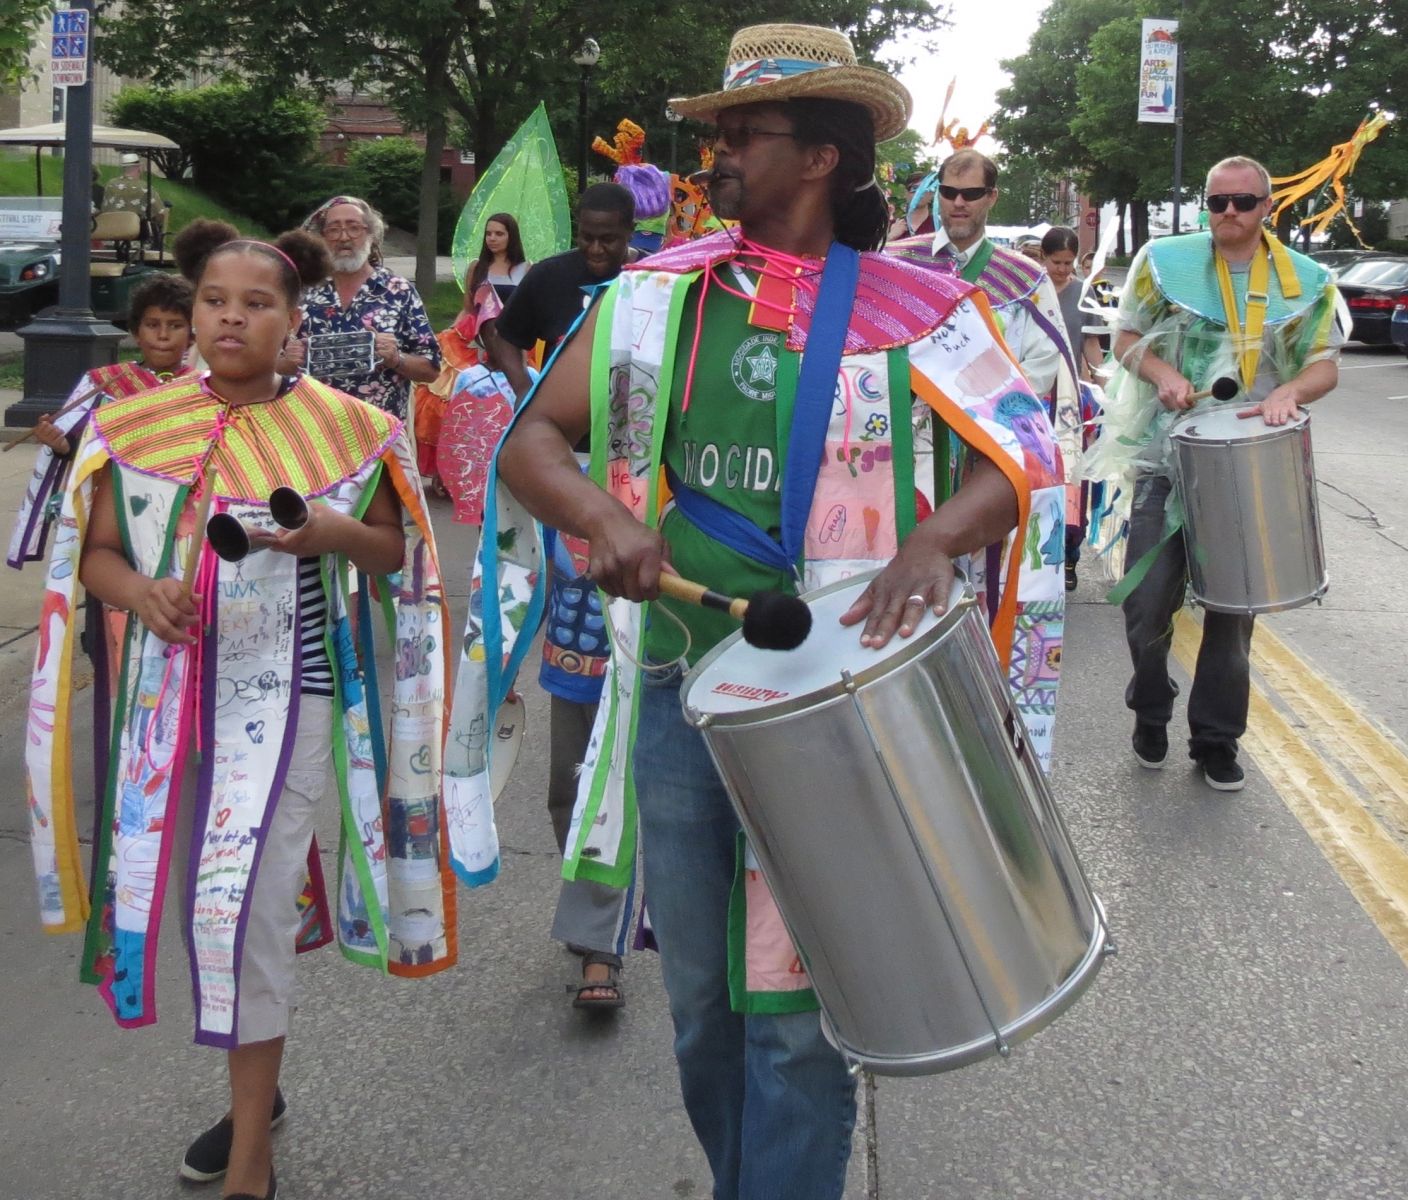 Drummers marching in parade